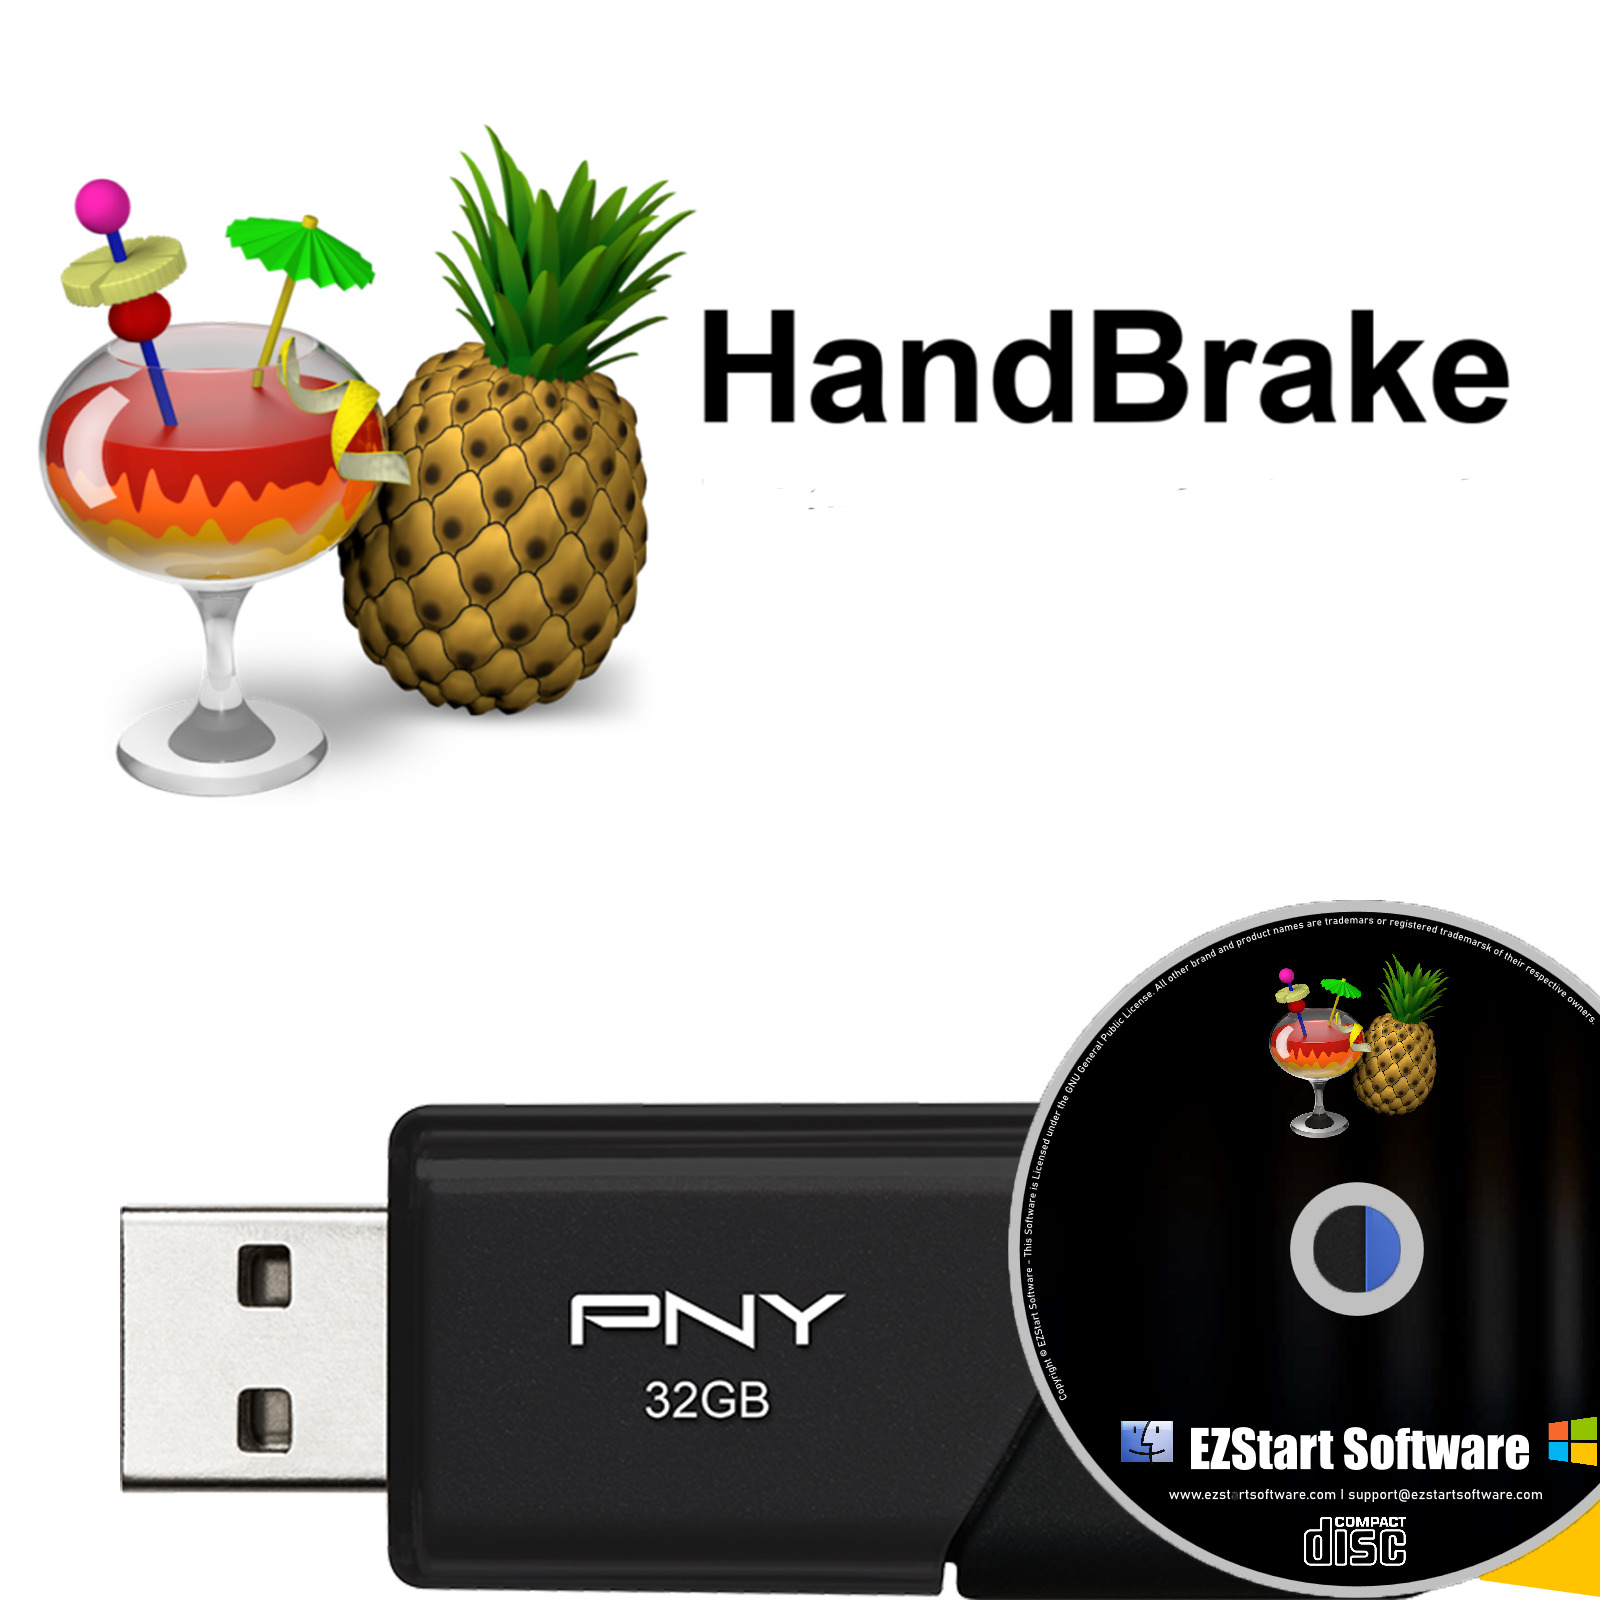 HandBrake Video to Convert Video From Any Format To Modern Codecs on CD/USB